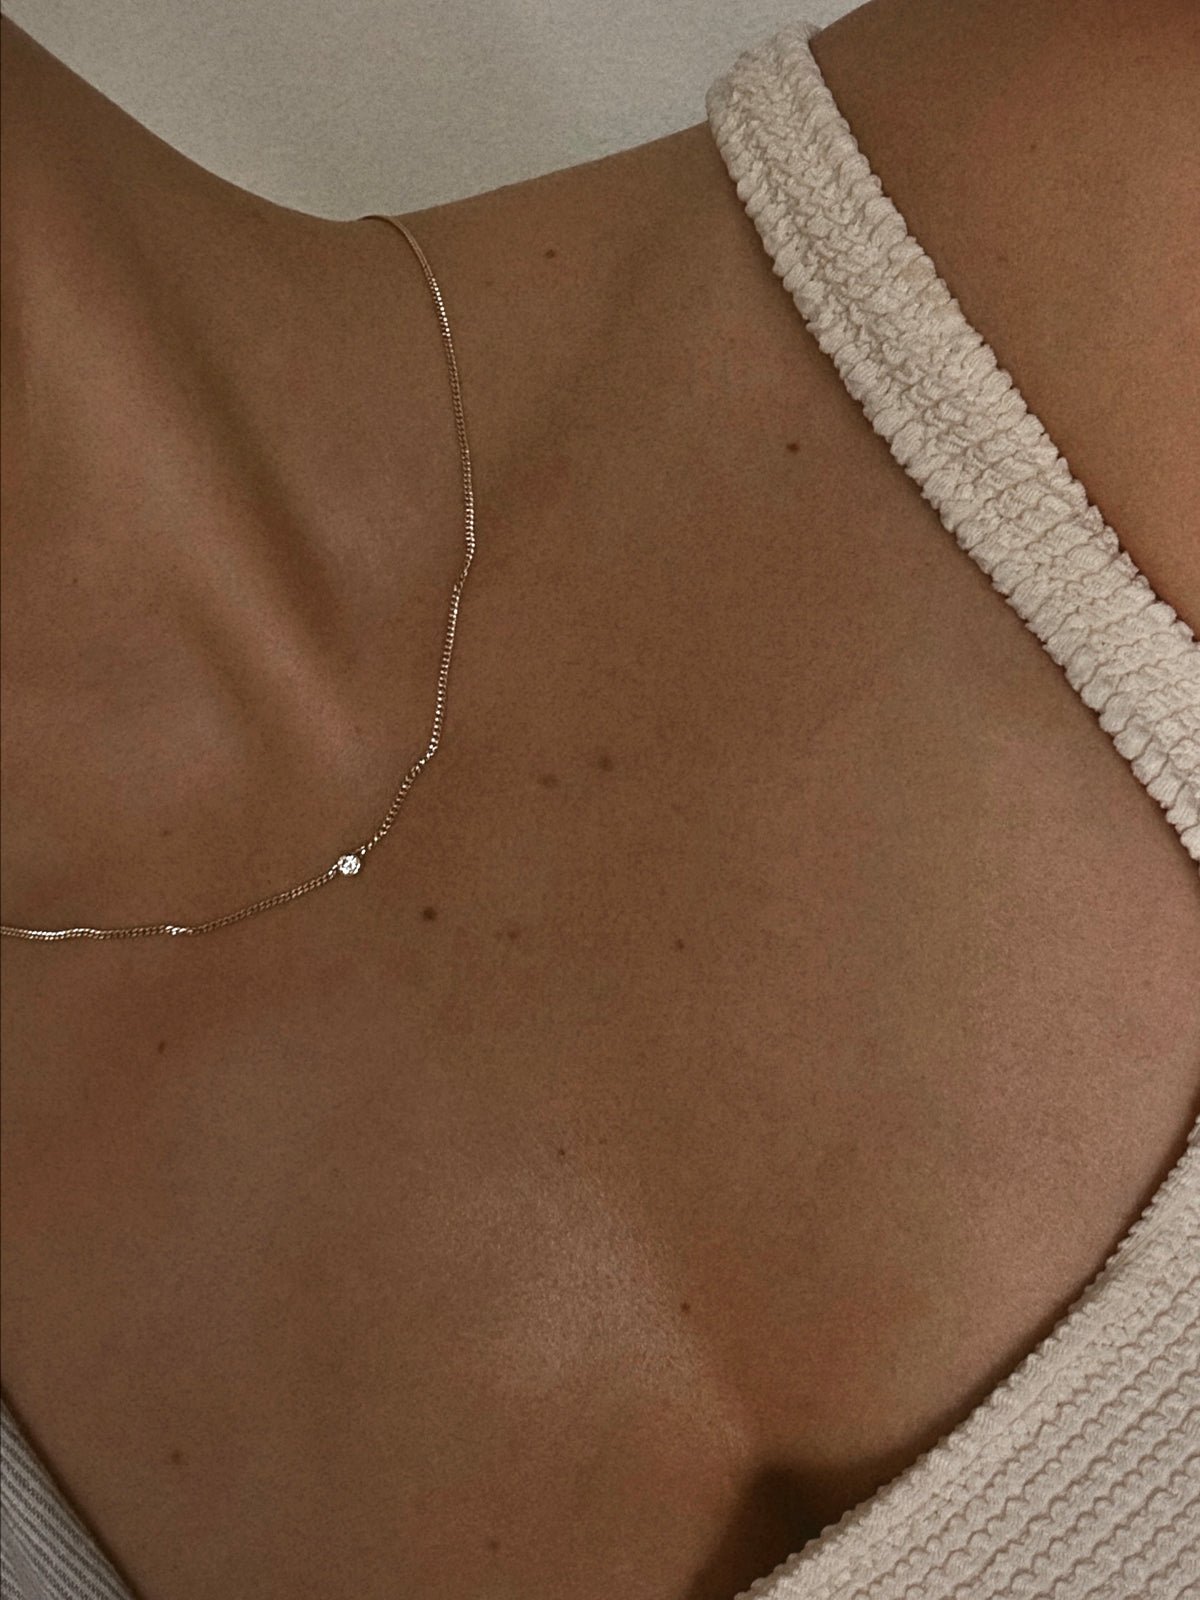 Woman wearing 14k gold chain necklace with diamond in center. 